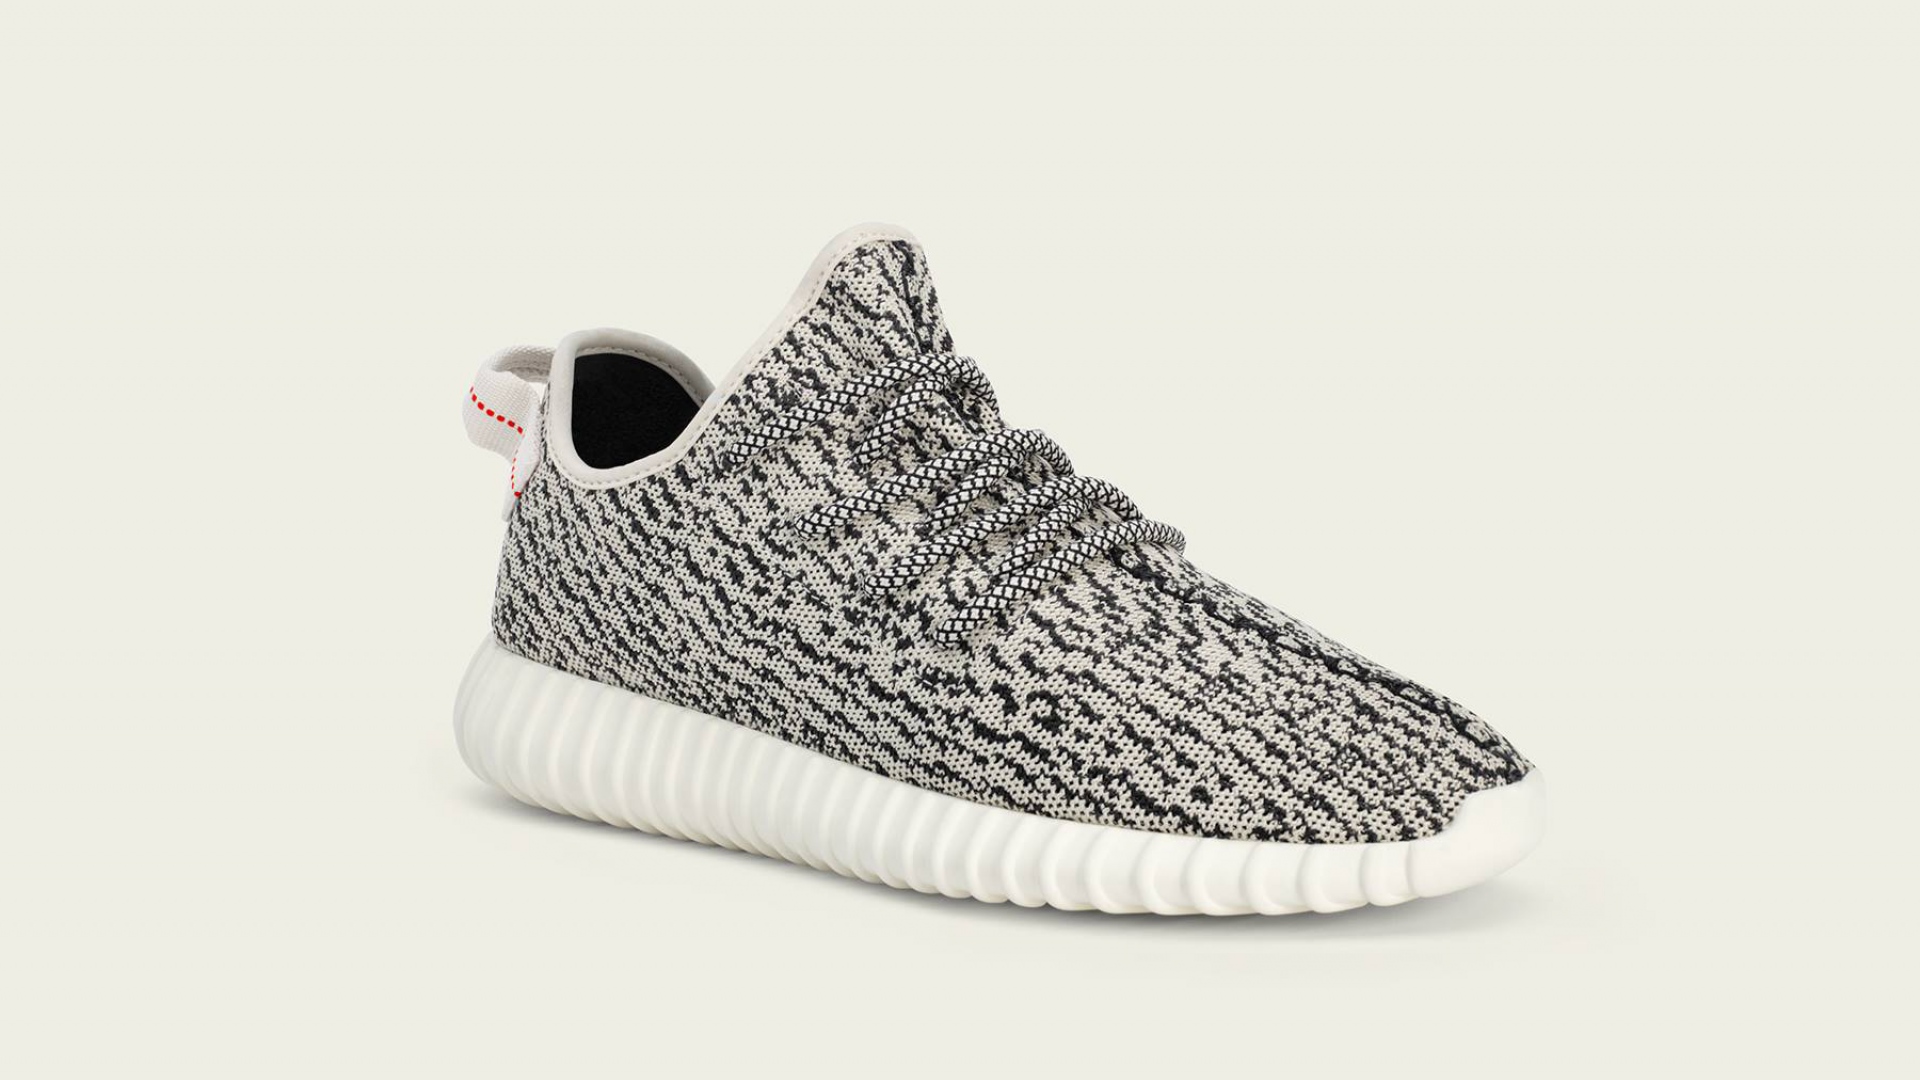  Yeezy boost 350 Adidas Sneakers Wallpaper Background Full HD 1080p